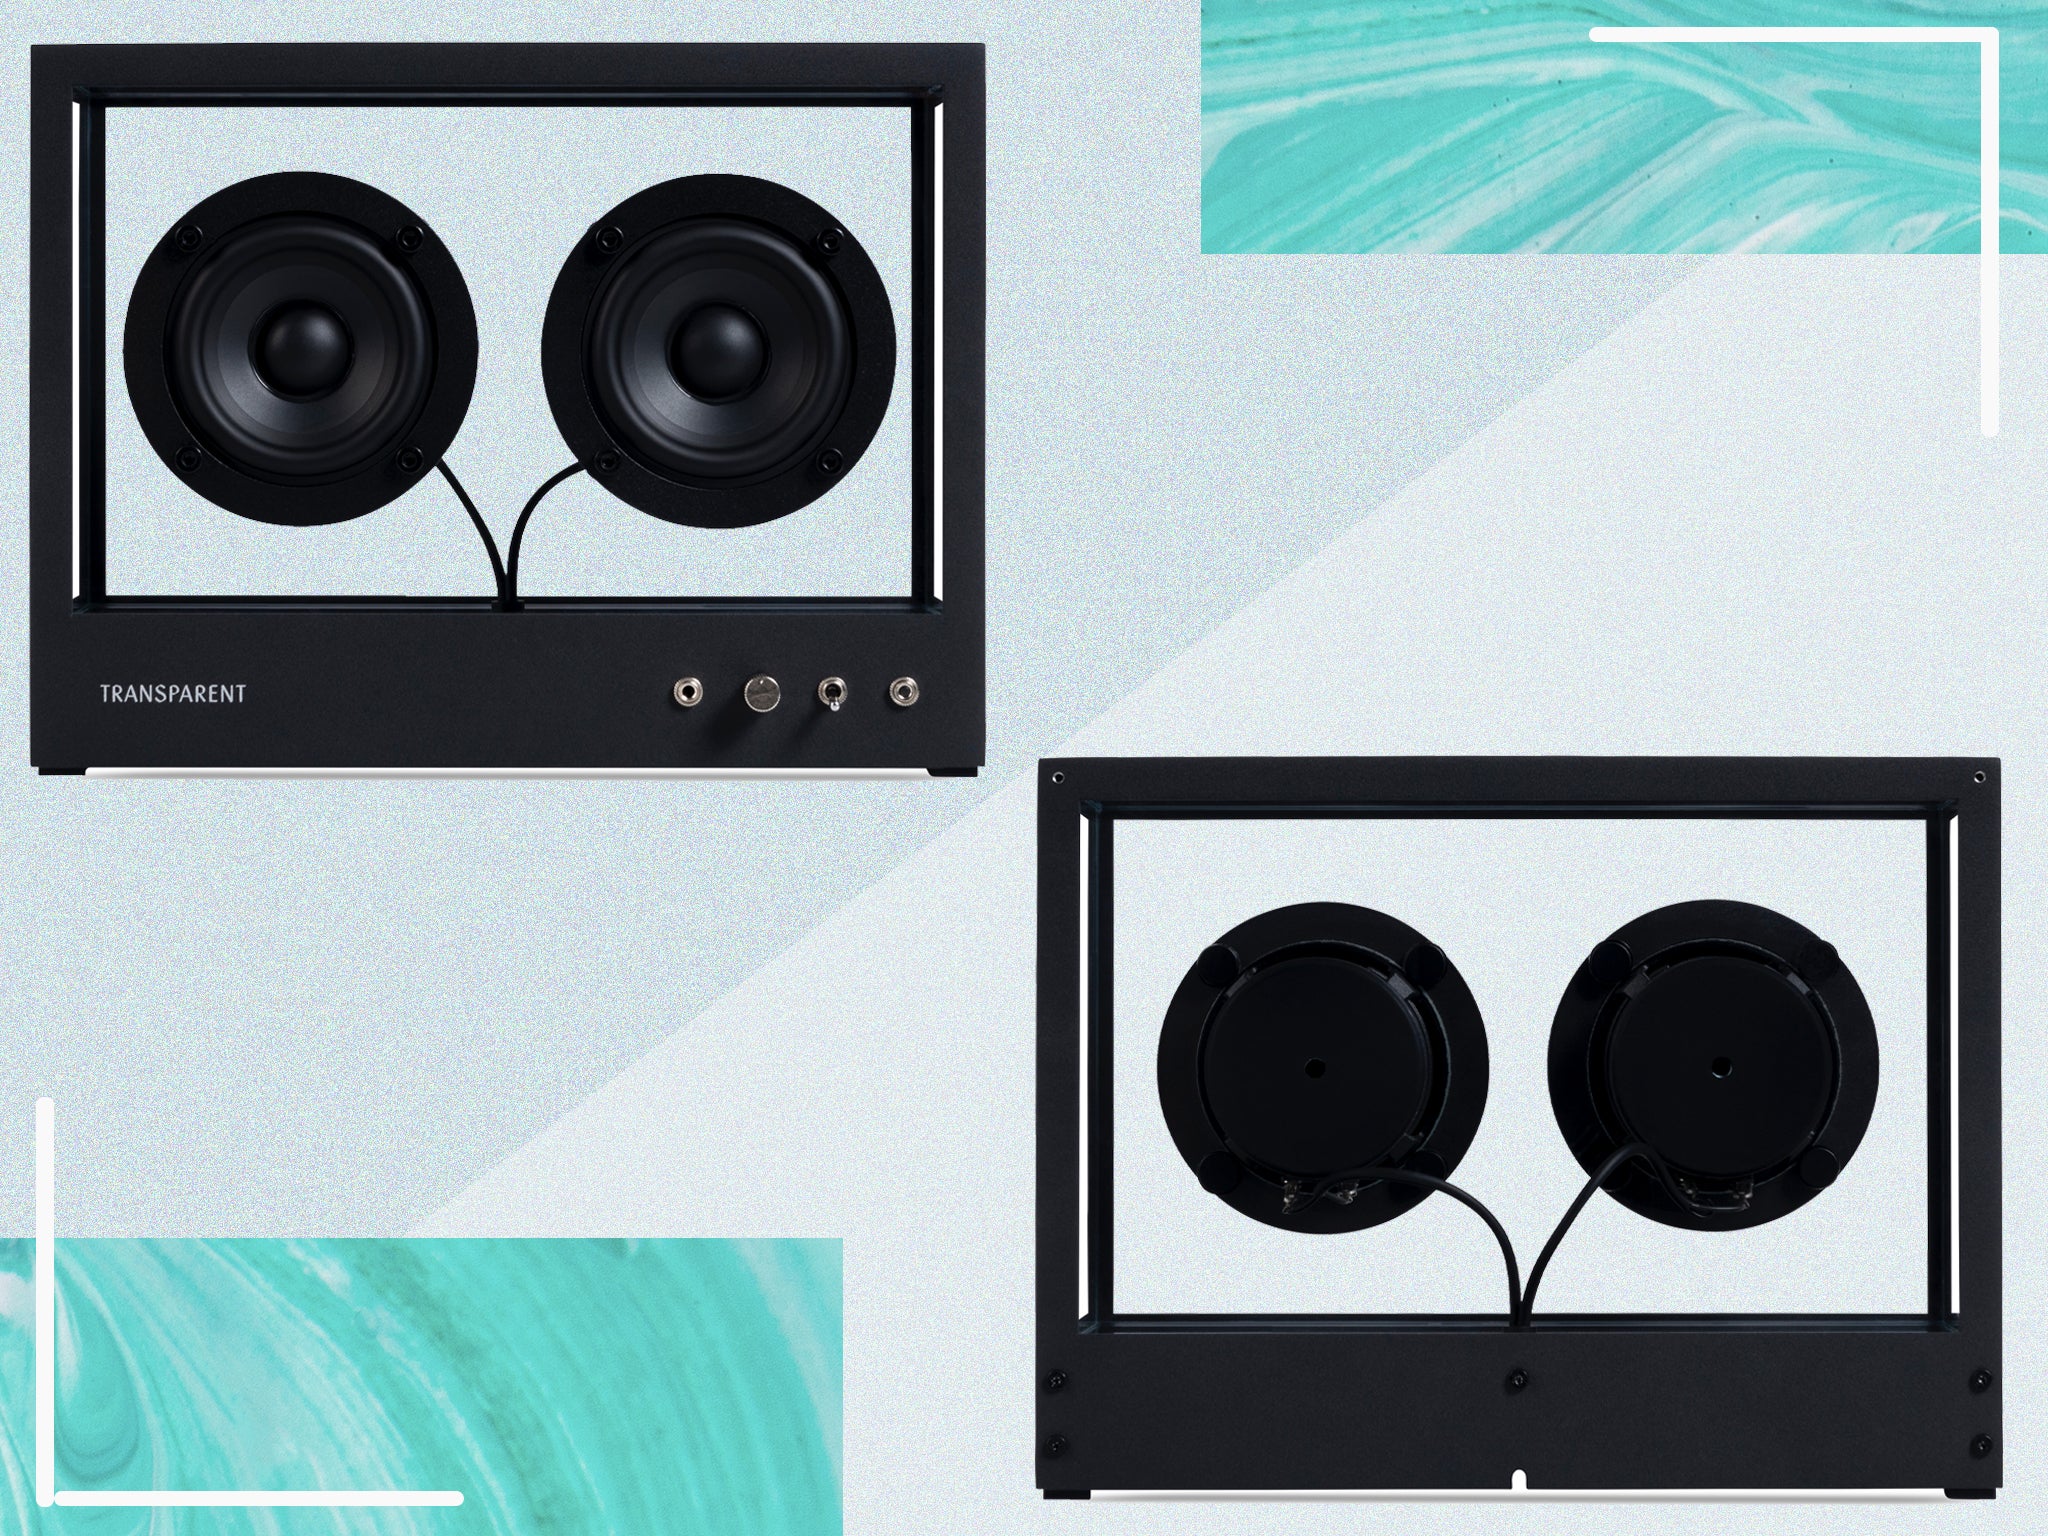 Testing everything from design to sound, we find out if this is a worthy investment